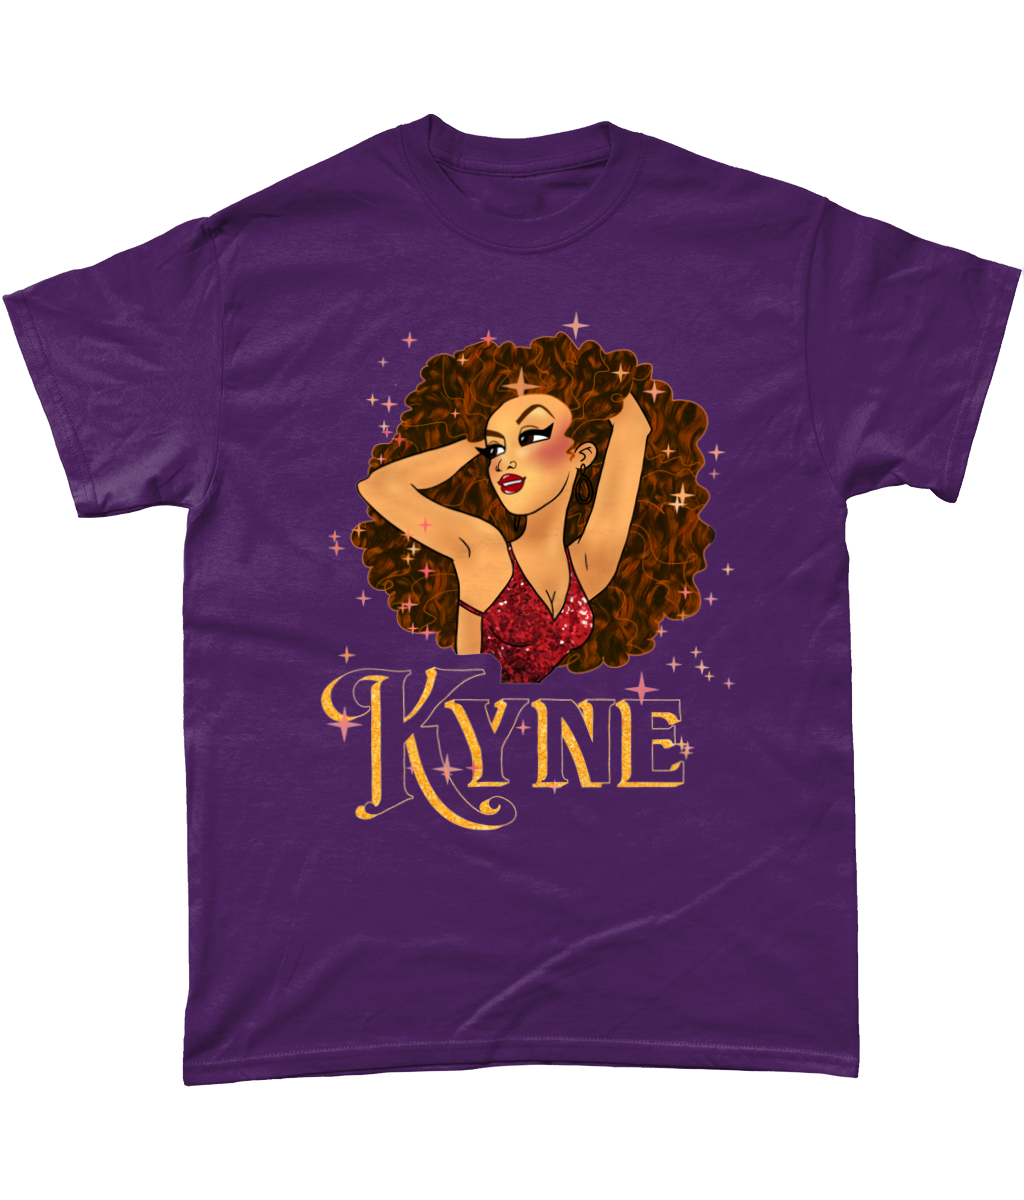 Kyne - In Stars T-Shirt - SNATCHED MERCH